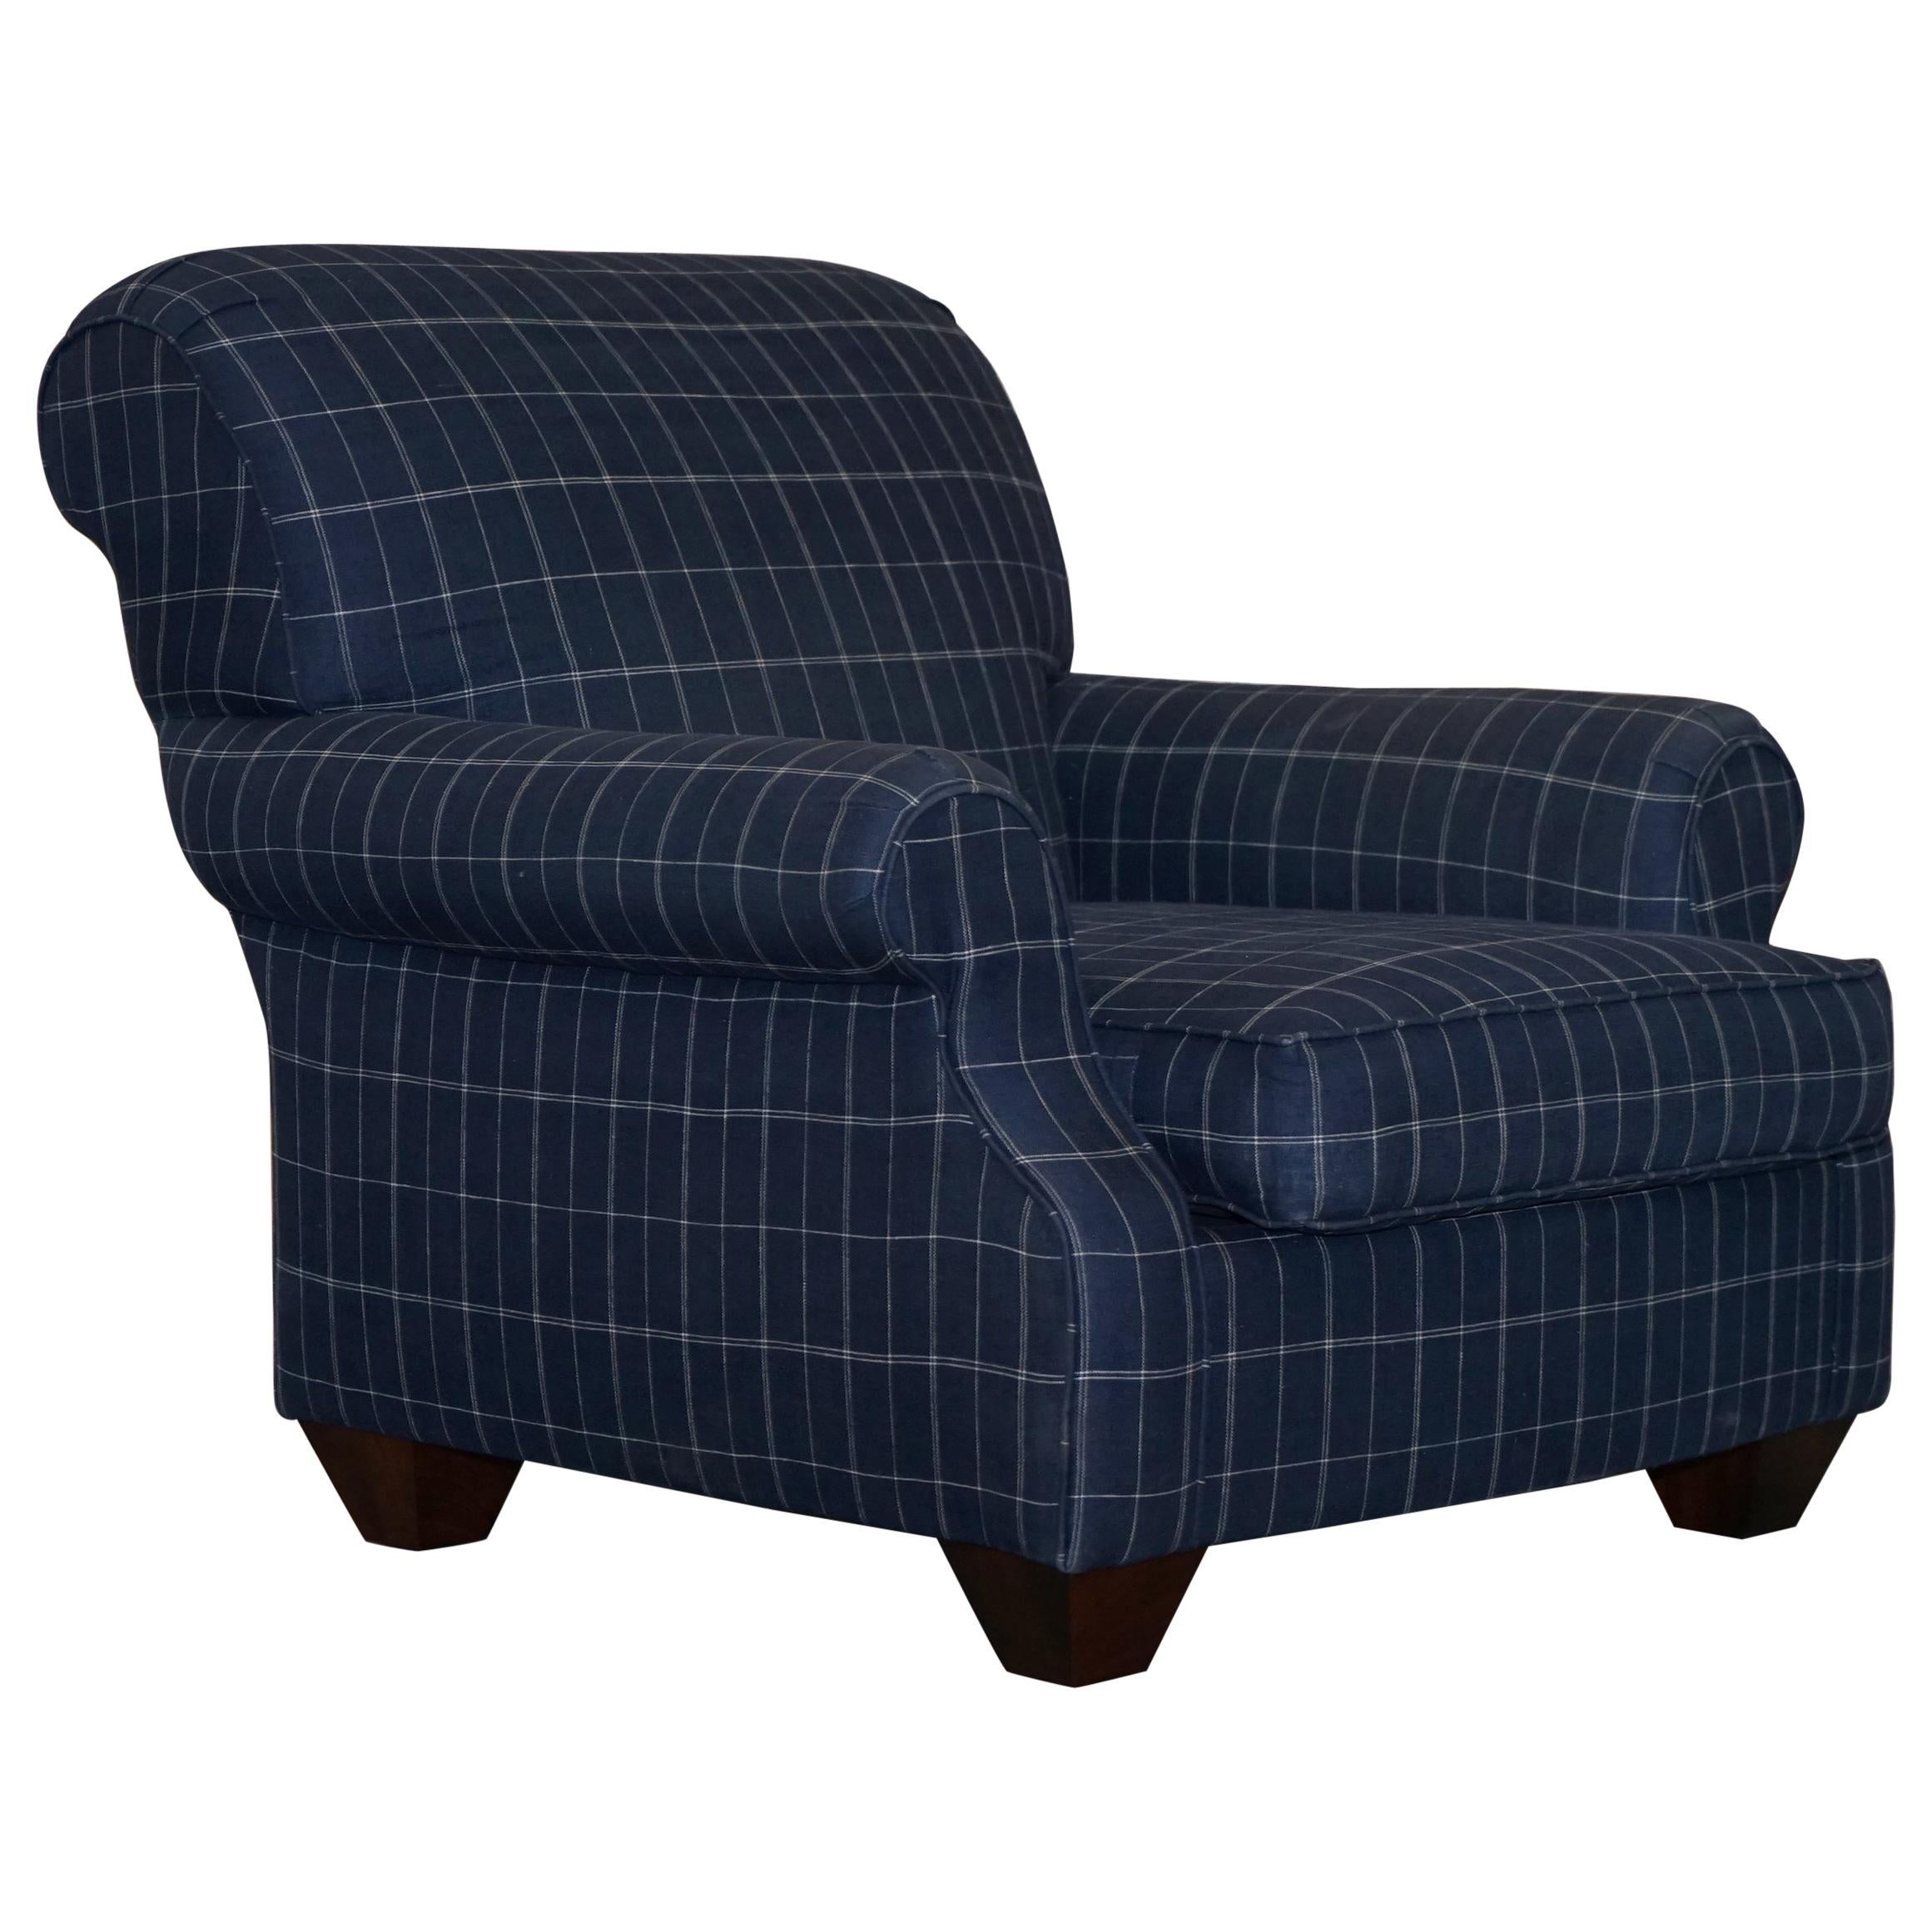 Lovely Ralph Lauren "the London Club" Large Armchair Chequered Blue Upholstery